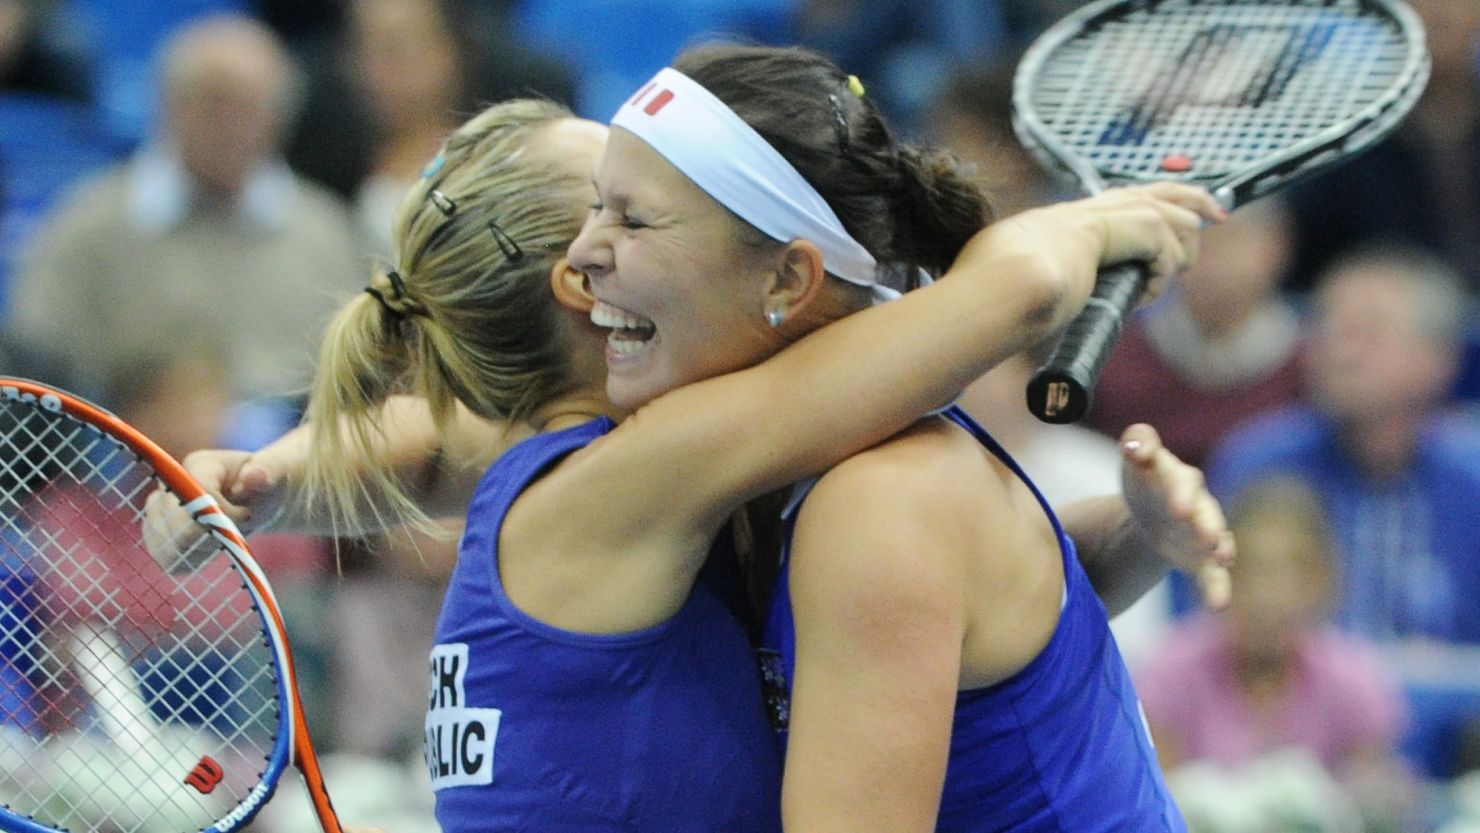 Lucie Hradecka (right) and Kveta Peschke celebrate their Fed Cup doubles success over Russia.